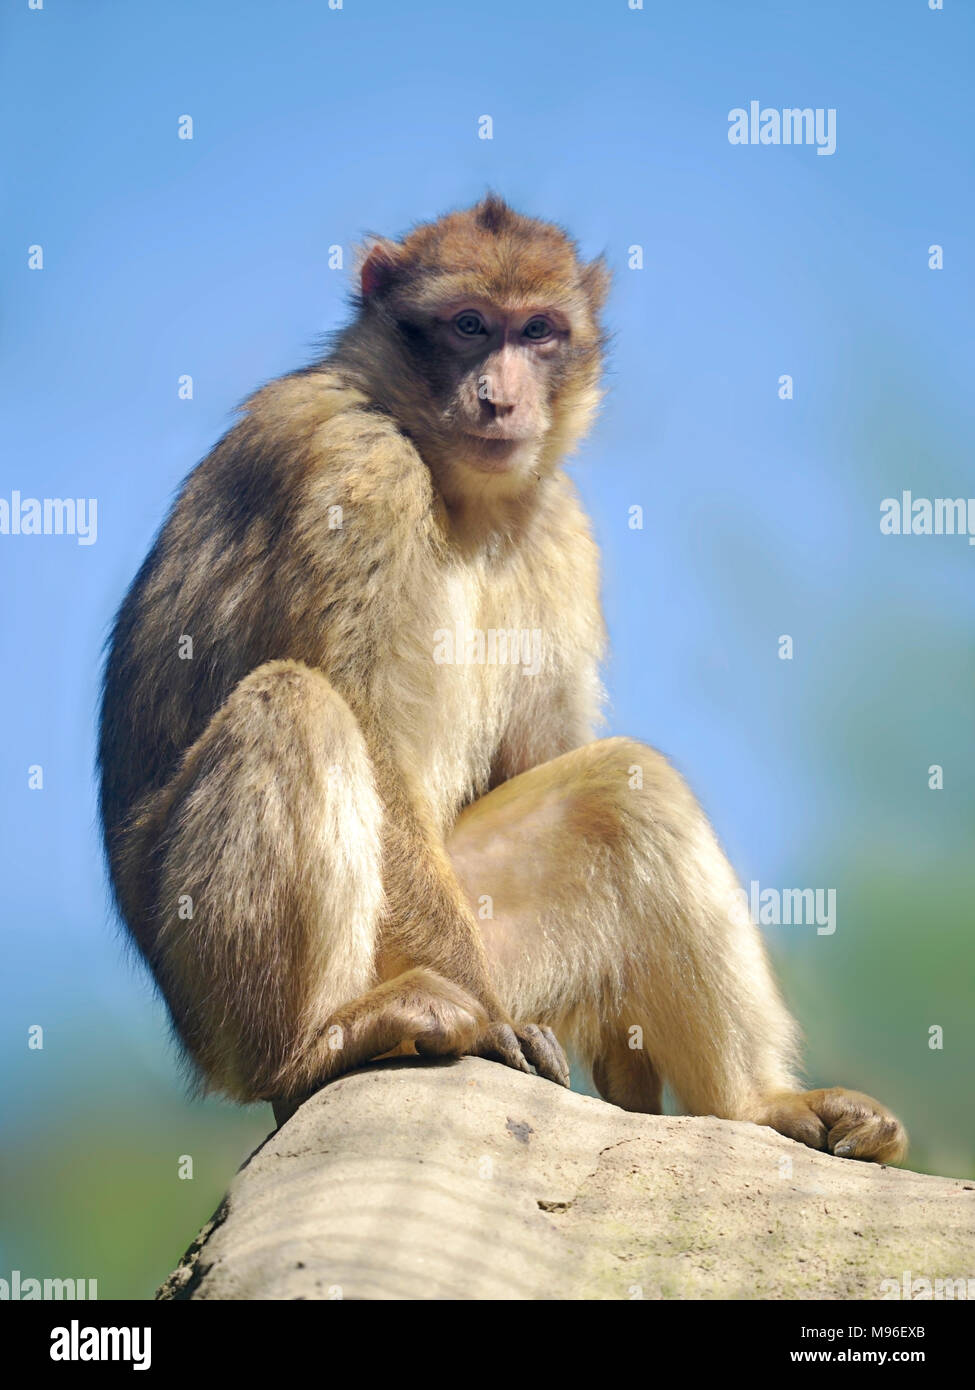 Barbary macaque or barbary ape or magot (Macaca sylvanus) sitting on the blue sky background Stock Photo